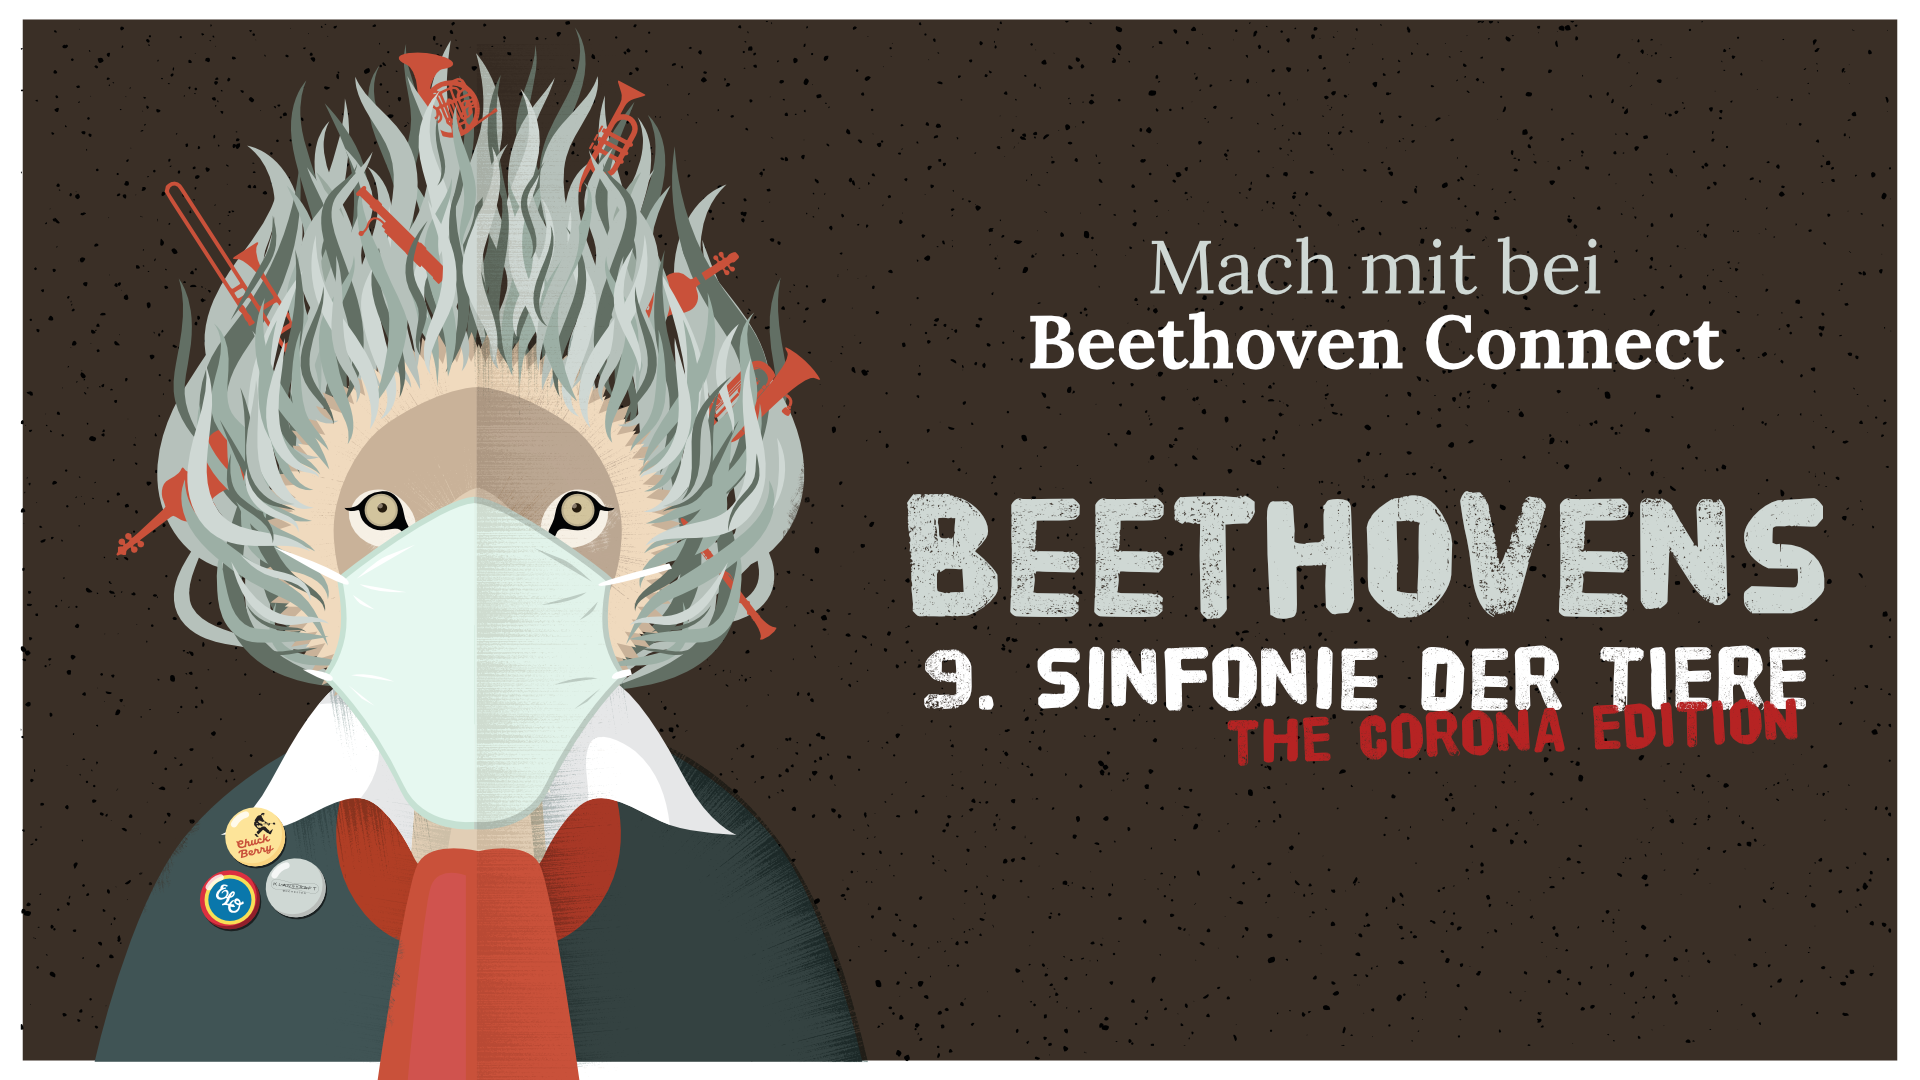 (c) Beethoven-connect.com